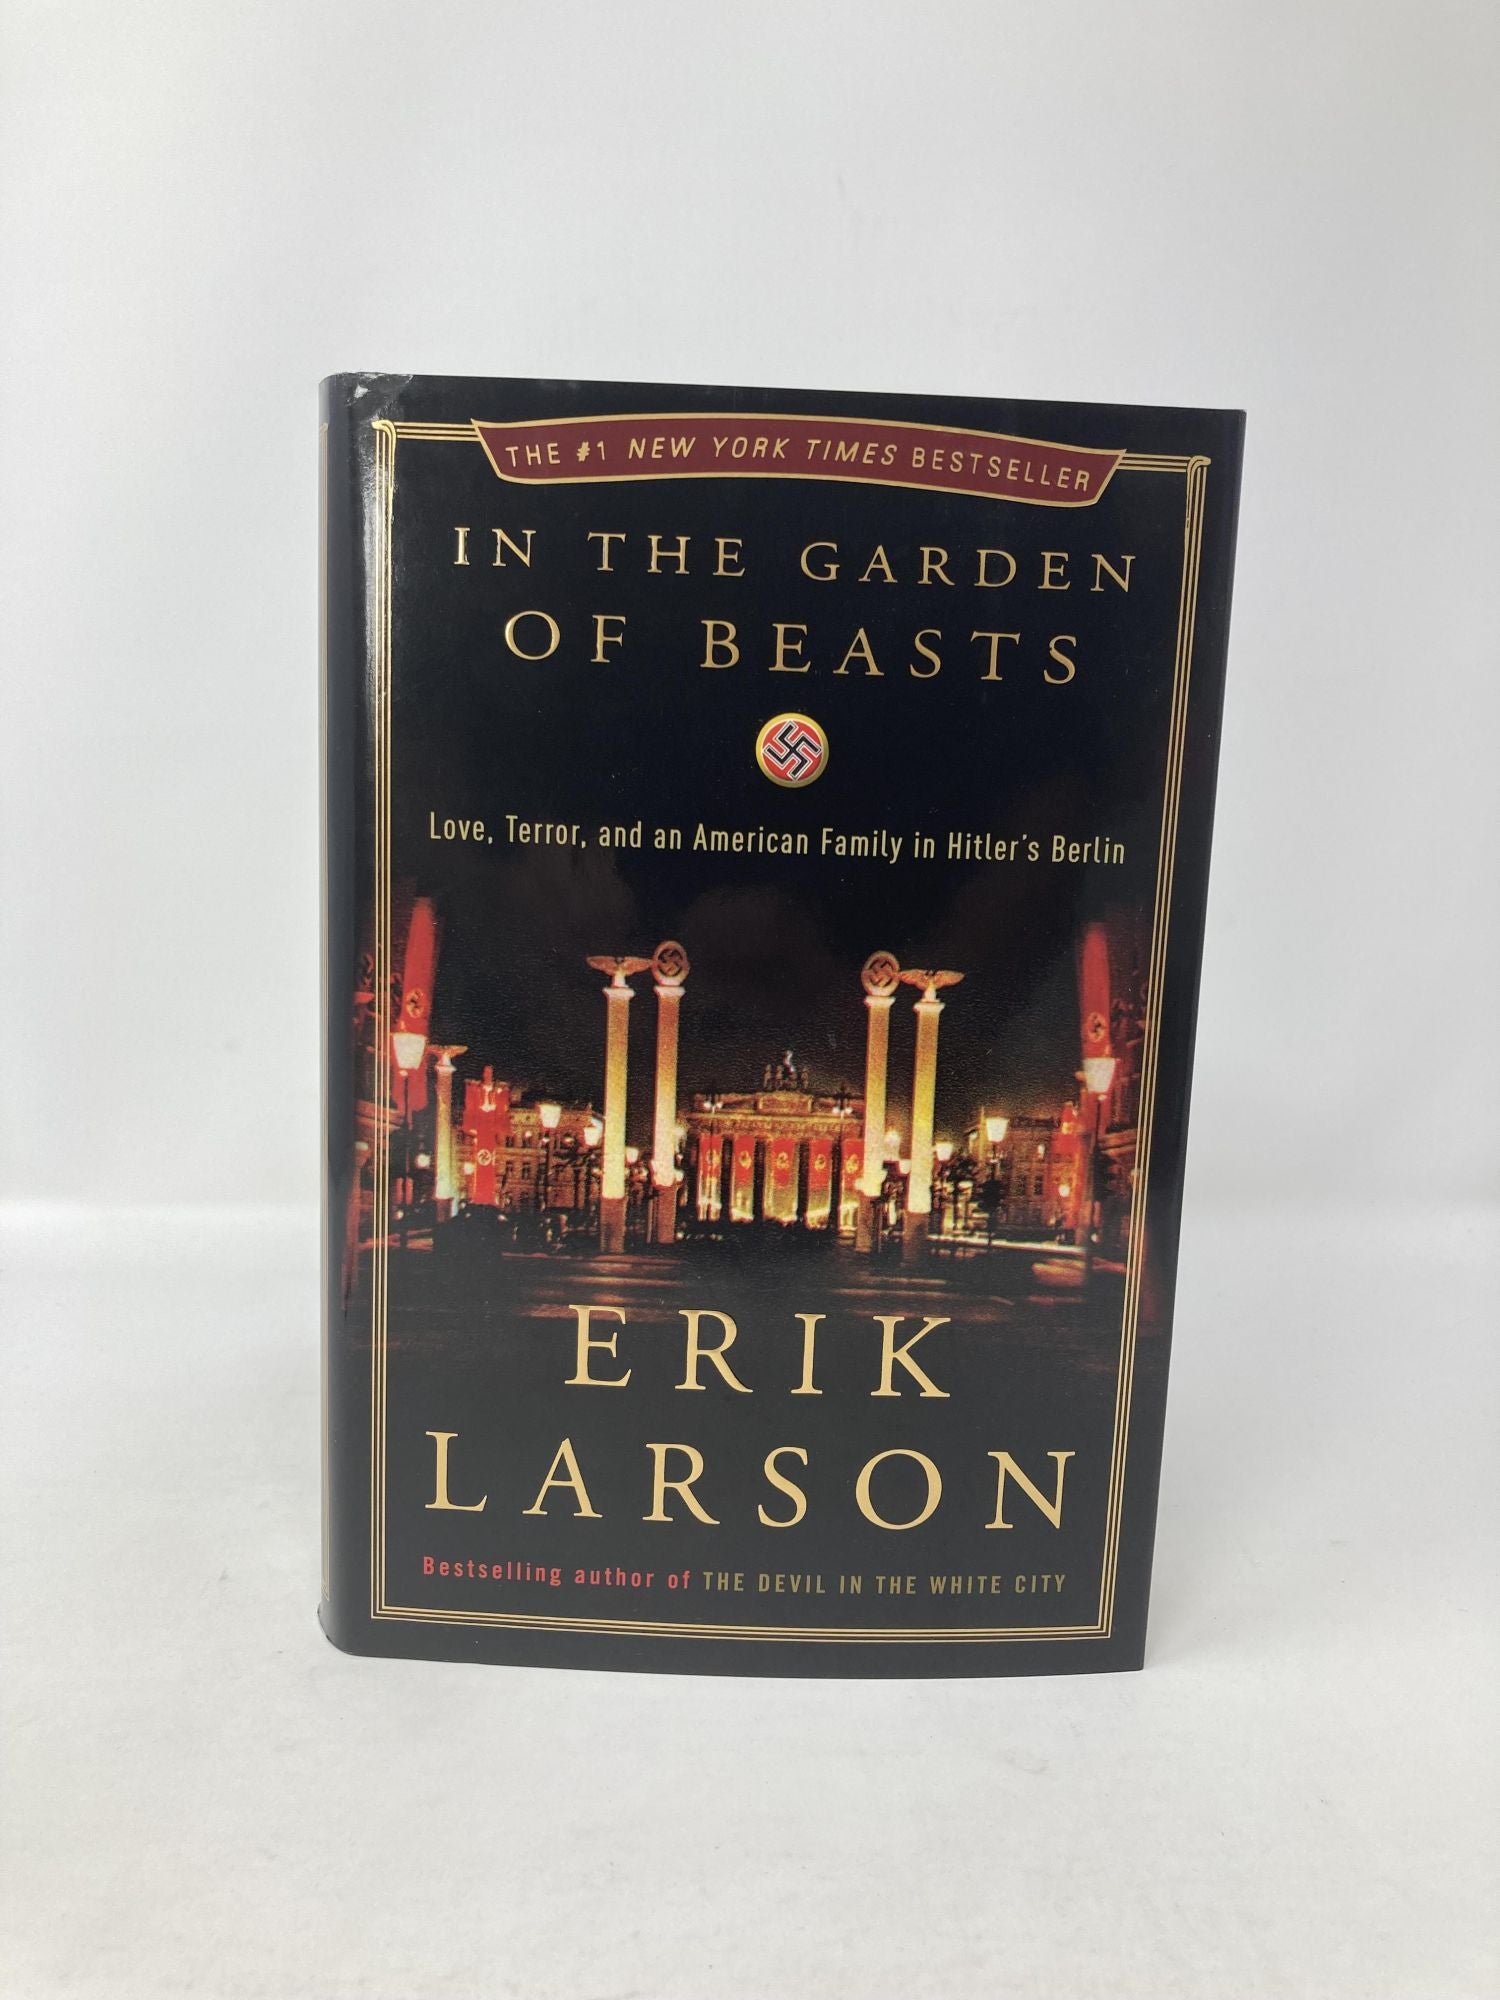 Terror,　Garden　Love,　Beasts:　Eric　Larson　In　Family　First　Hitler's　American　an　the　Berlin　of　and　in　Edition